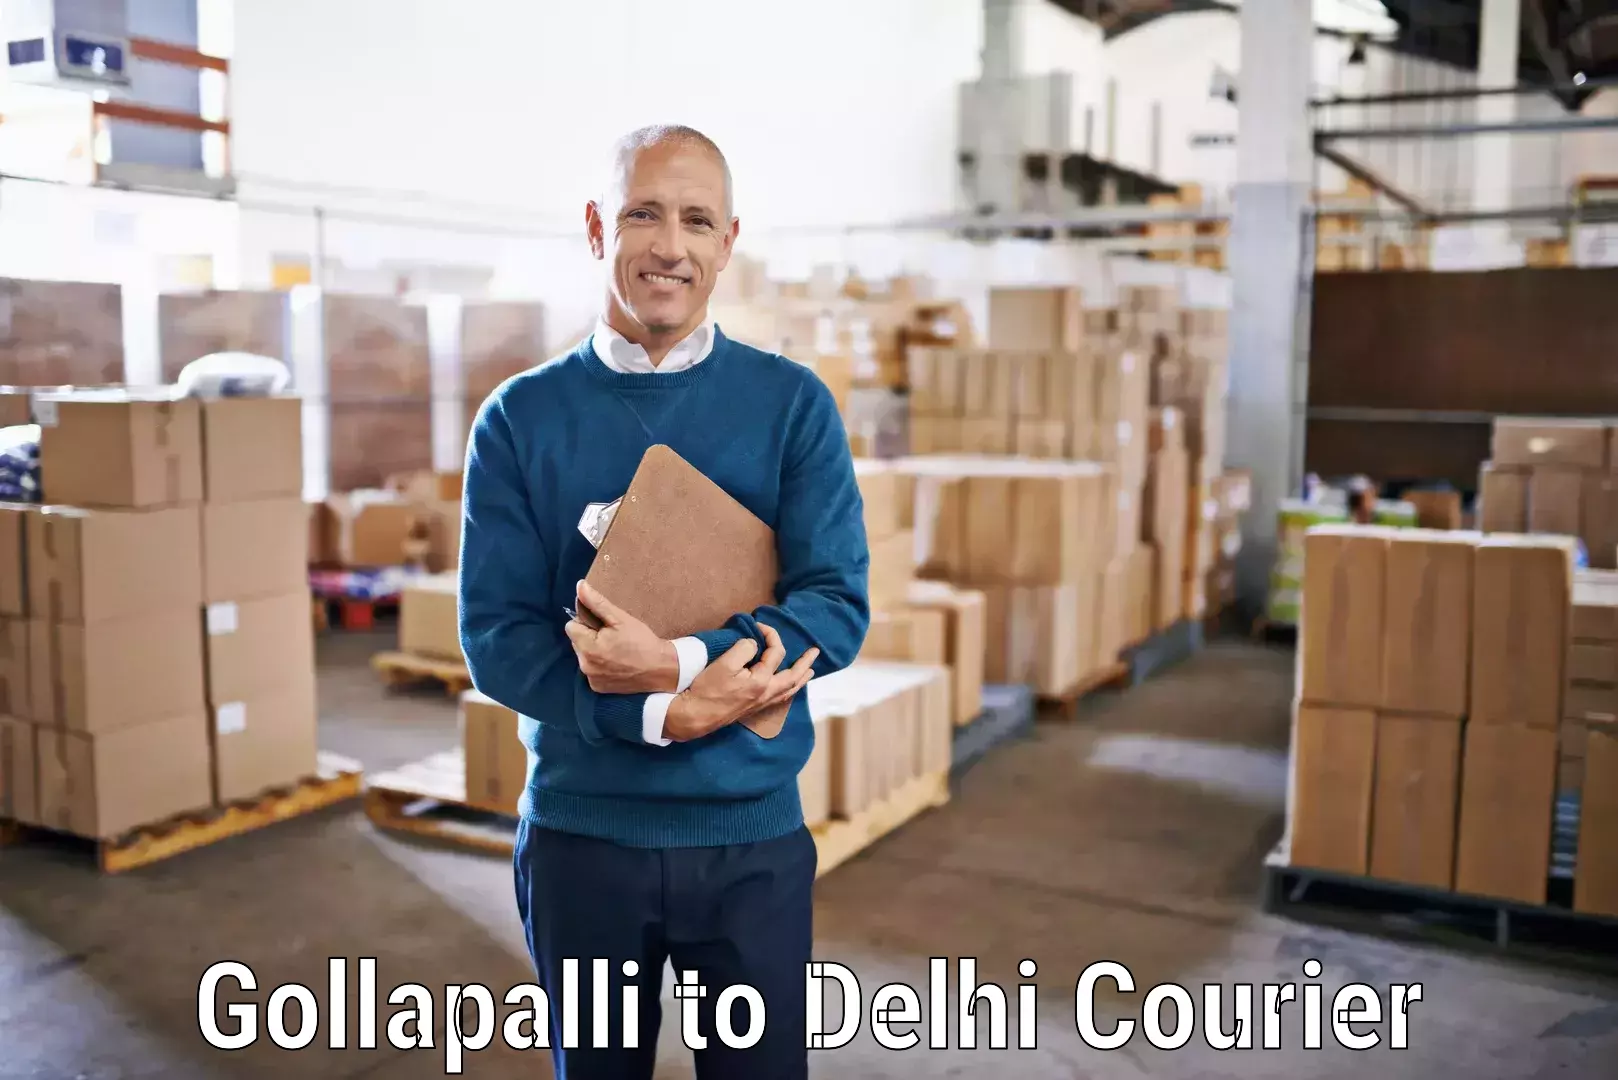 Same-day delivery solutions Gollapalli to East Delhi